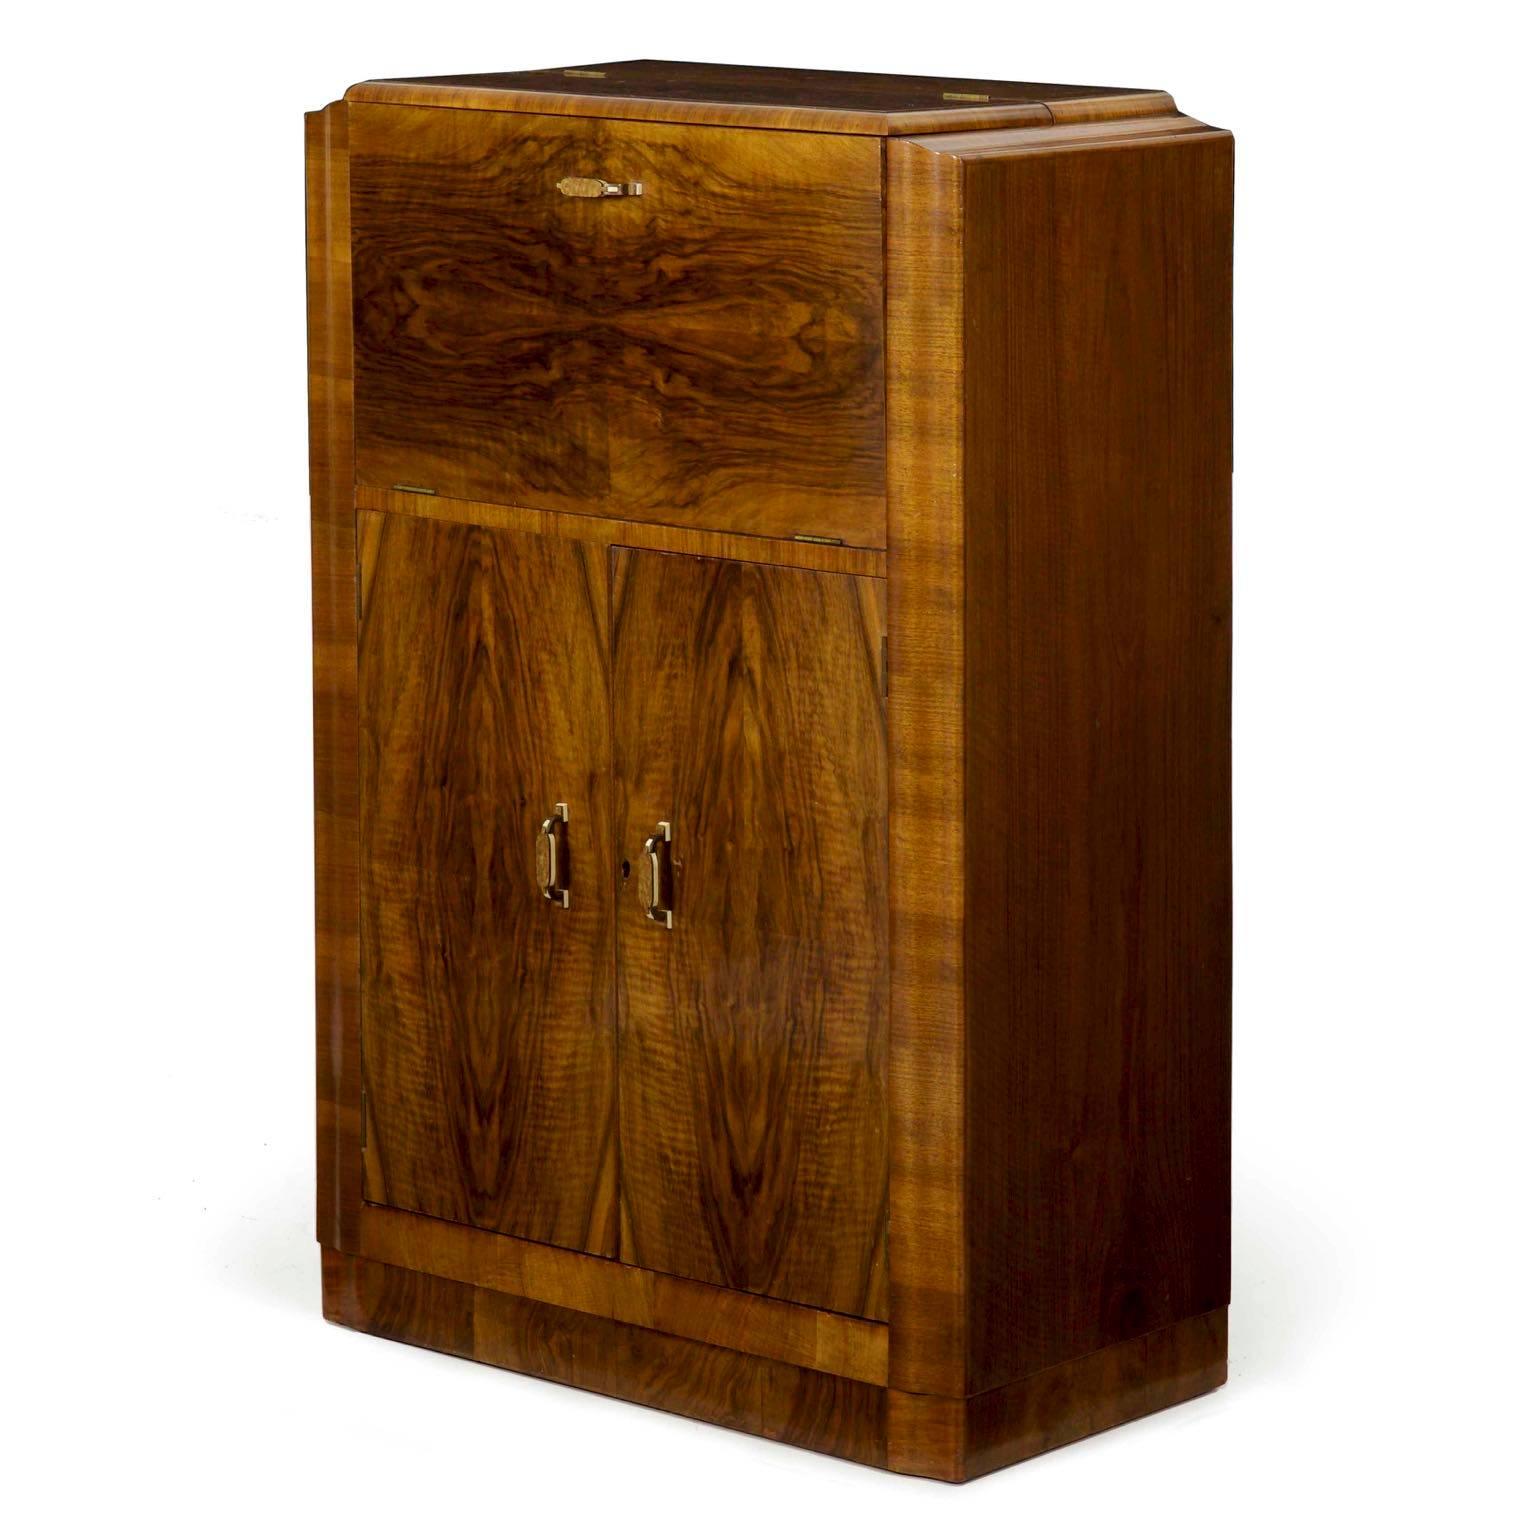 This is such an incredibly fine piece! In every sense true to the spirit of the Art Deco movement, this angular mini bar cabinet is simple in form while rich in material and design. The primary surfaces are all veneered in a dramatic walnut, the